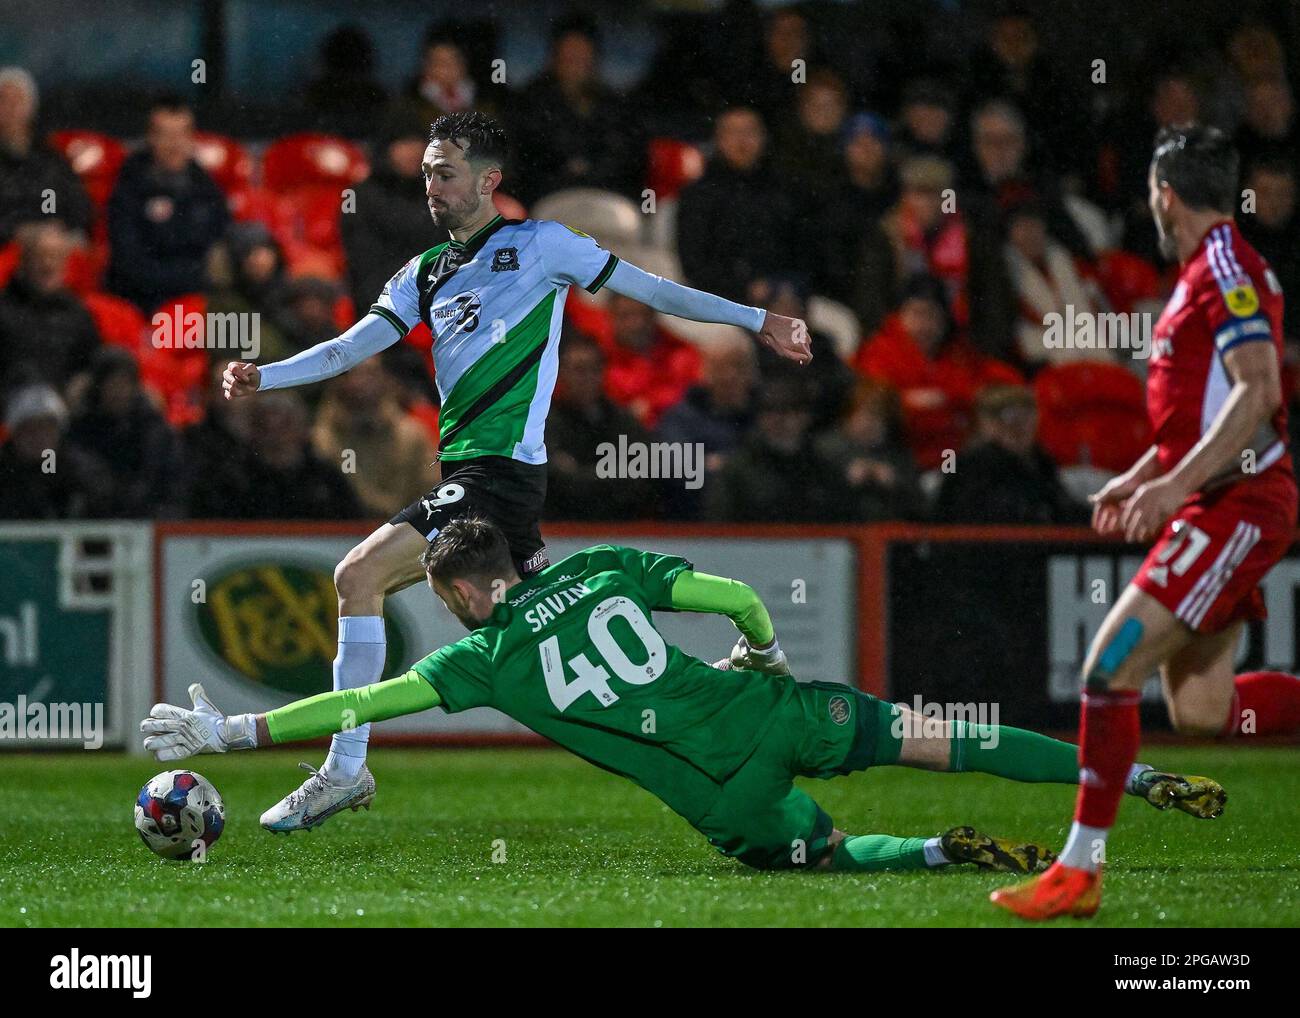 Ryan Hardie #9 of Plymouth Argyle  attacking and Toby Savin #40 of Accrington Stanley makes a save during the Sky Bet League 1 match Accrington Stanley vs Plymouth Argyle at Wham Stadium, Accrington, United Kingdom, 21st March 2023  (Photo by Stan Kasala/News Images) Stock Photo